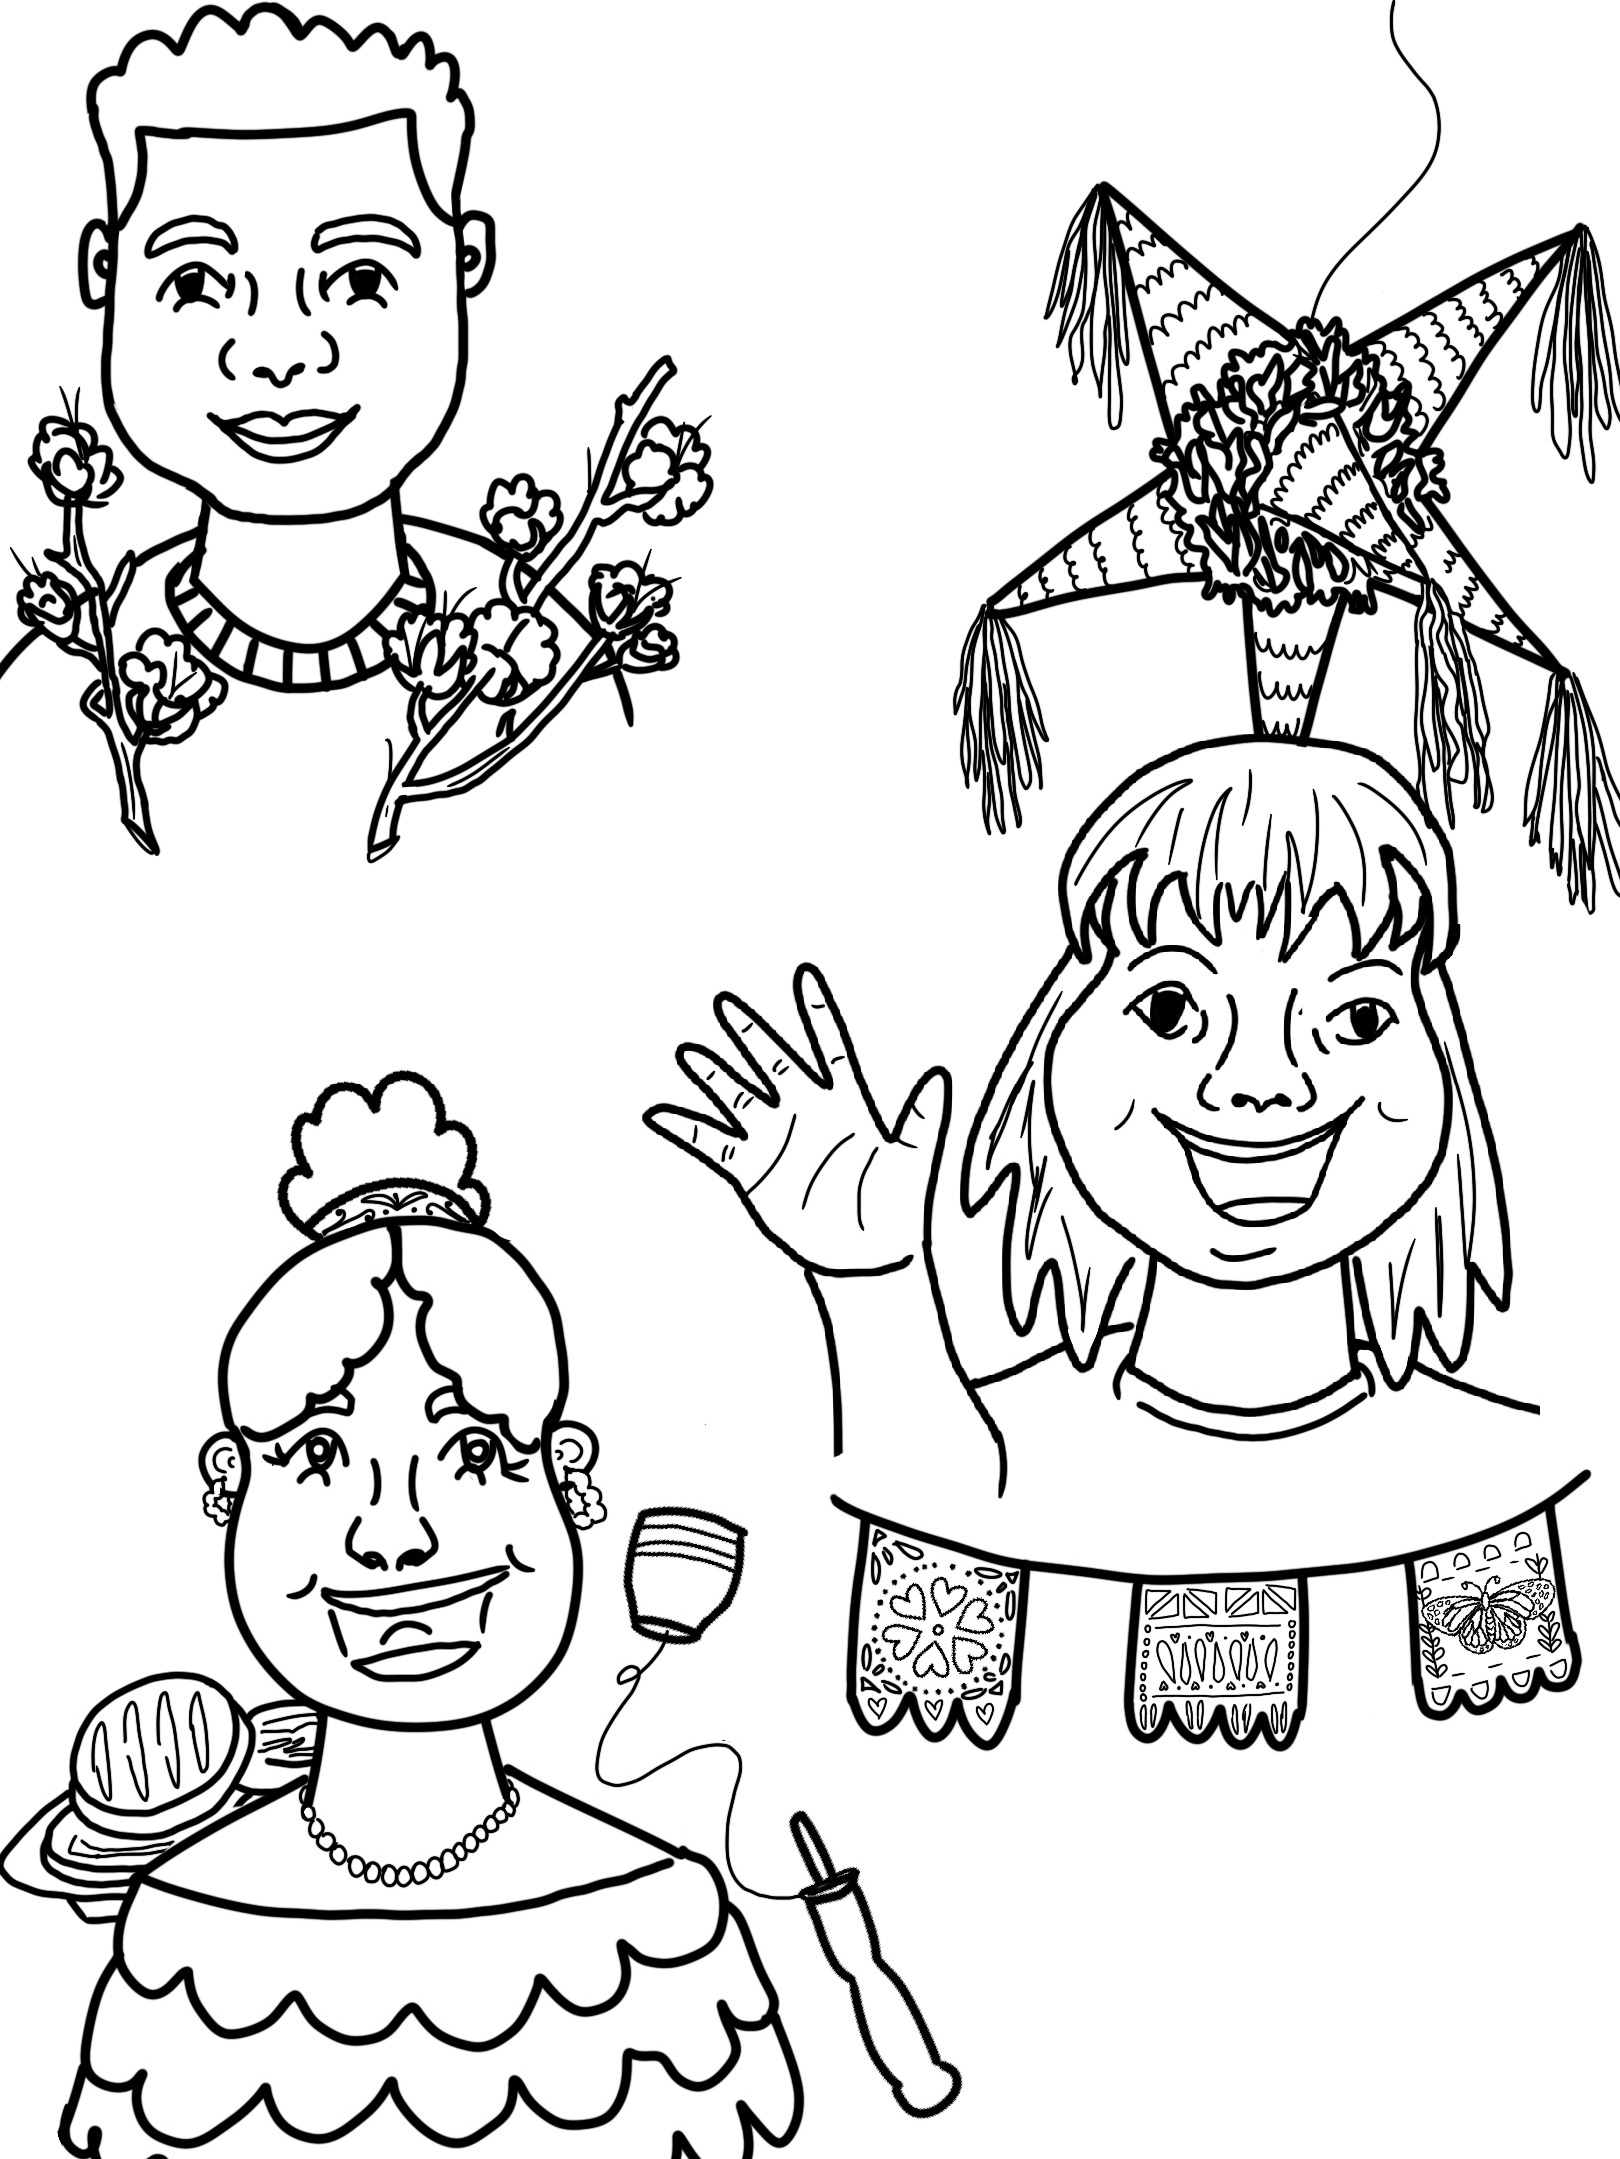 Palenque Coloring Book pg3_Page_1_Image_0001.png